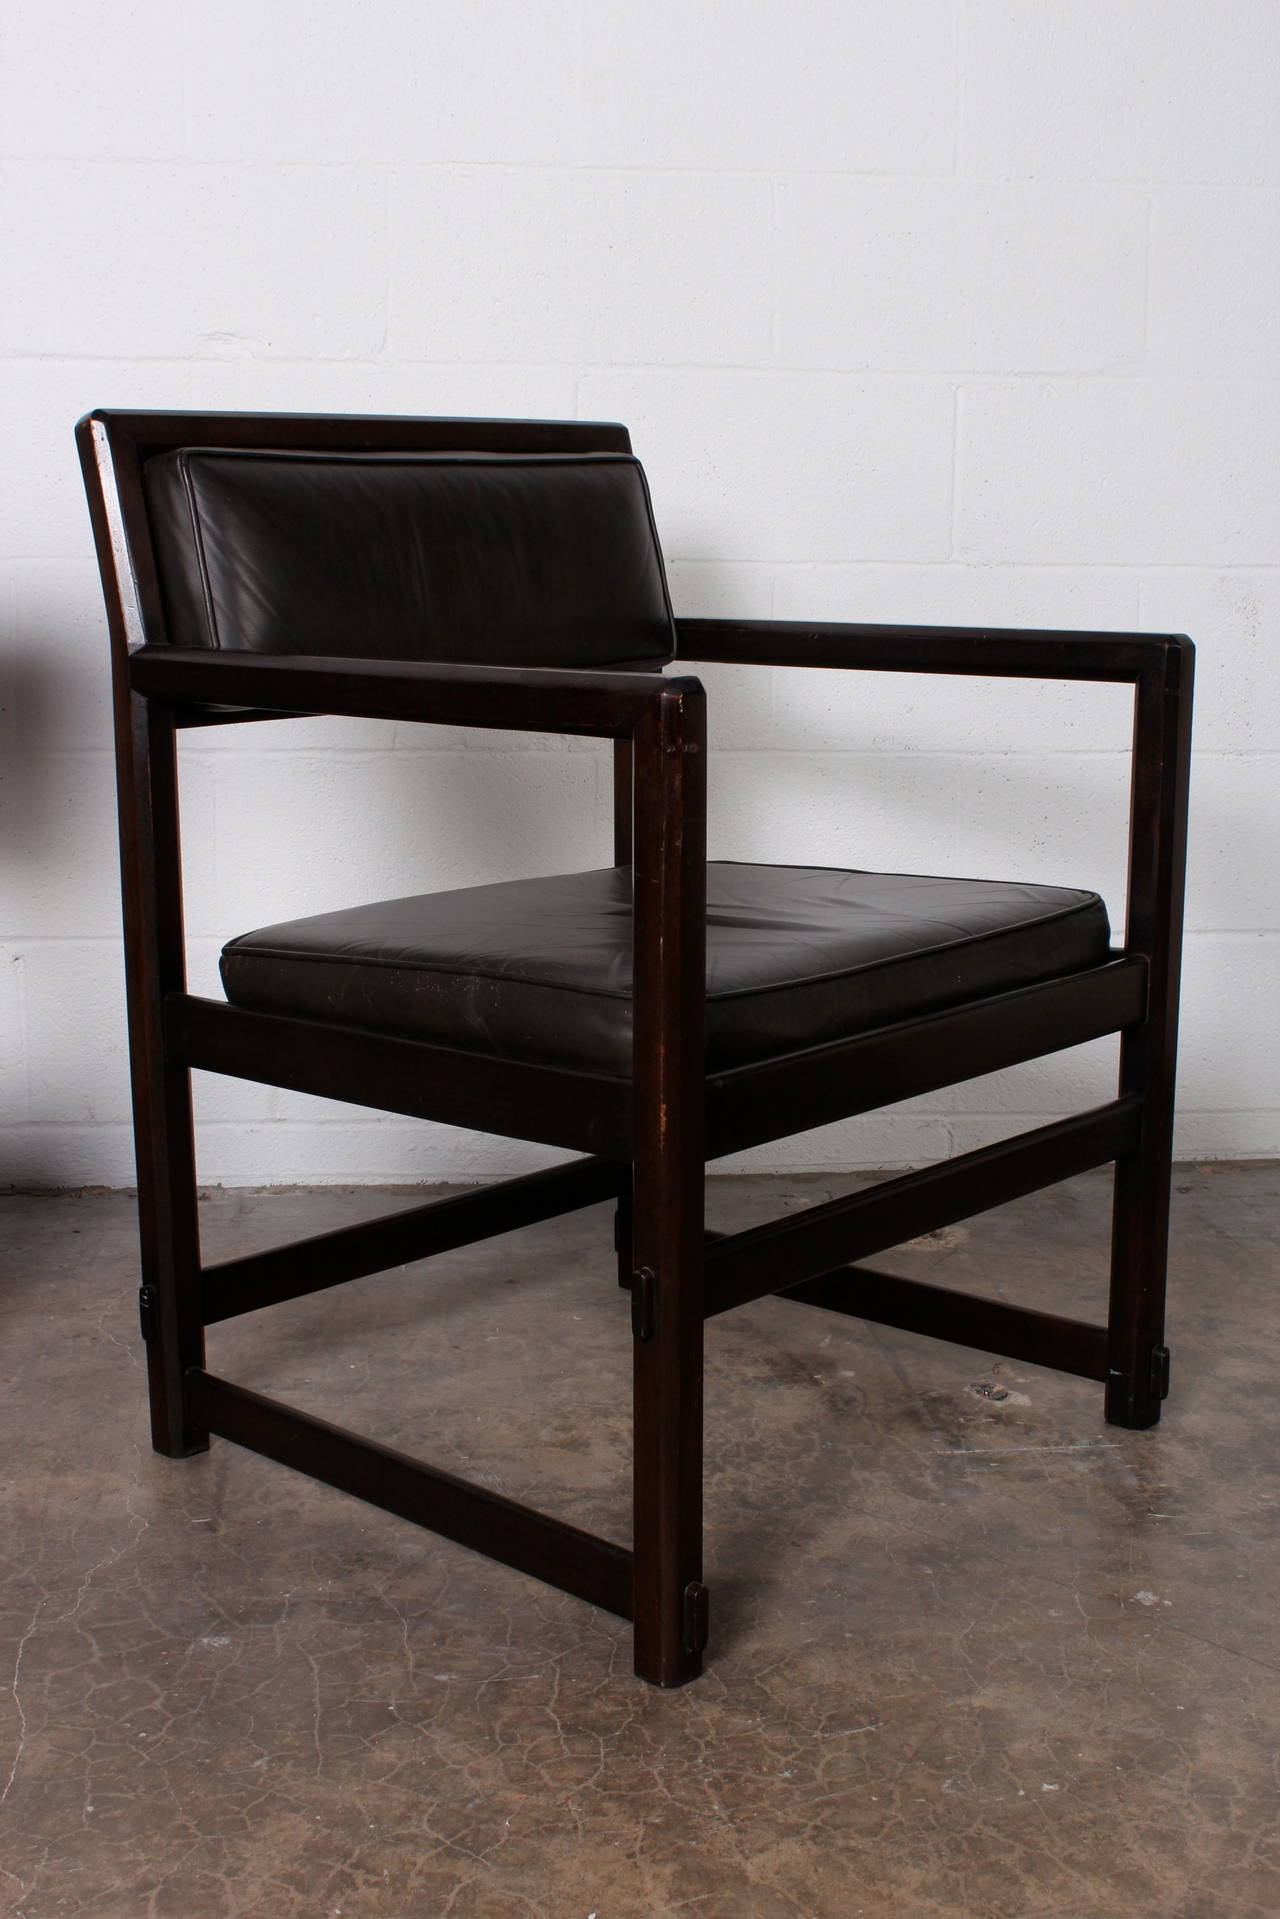 Pair of Mahogany and Leather Armchairs by Edward Wormley for Dunbar 3